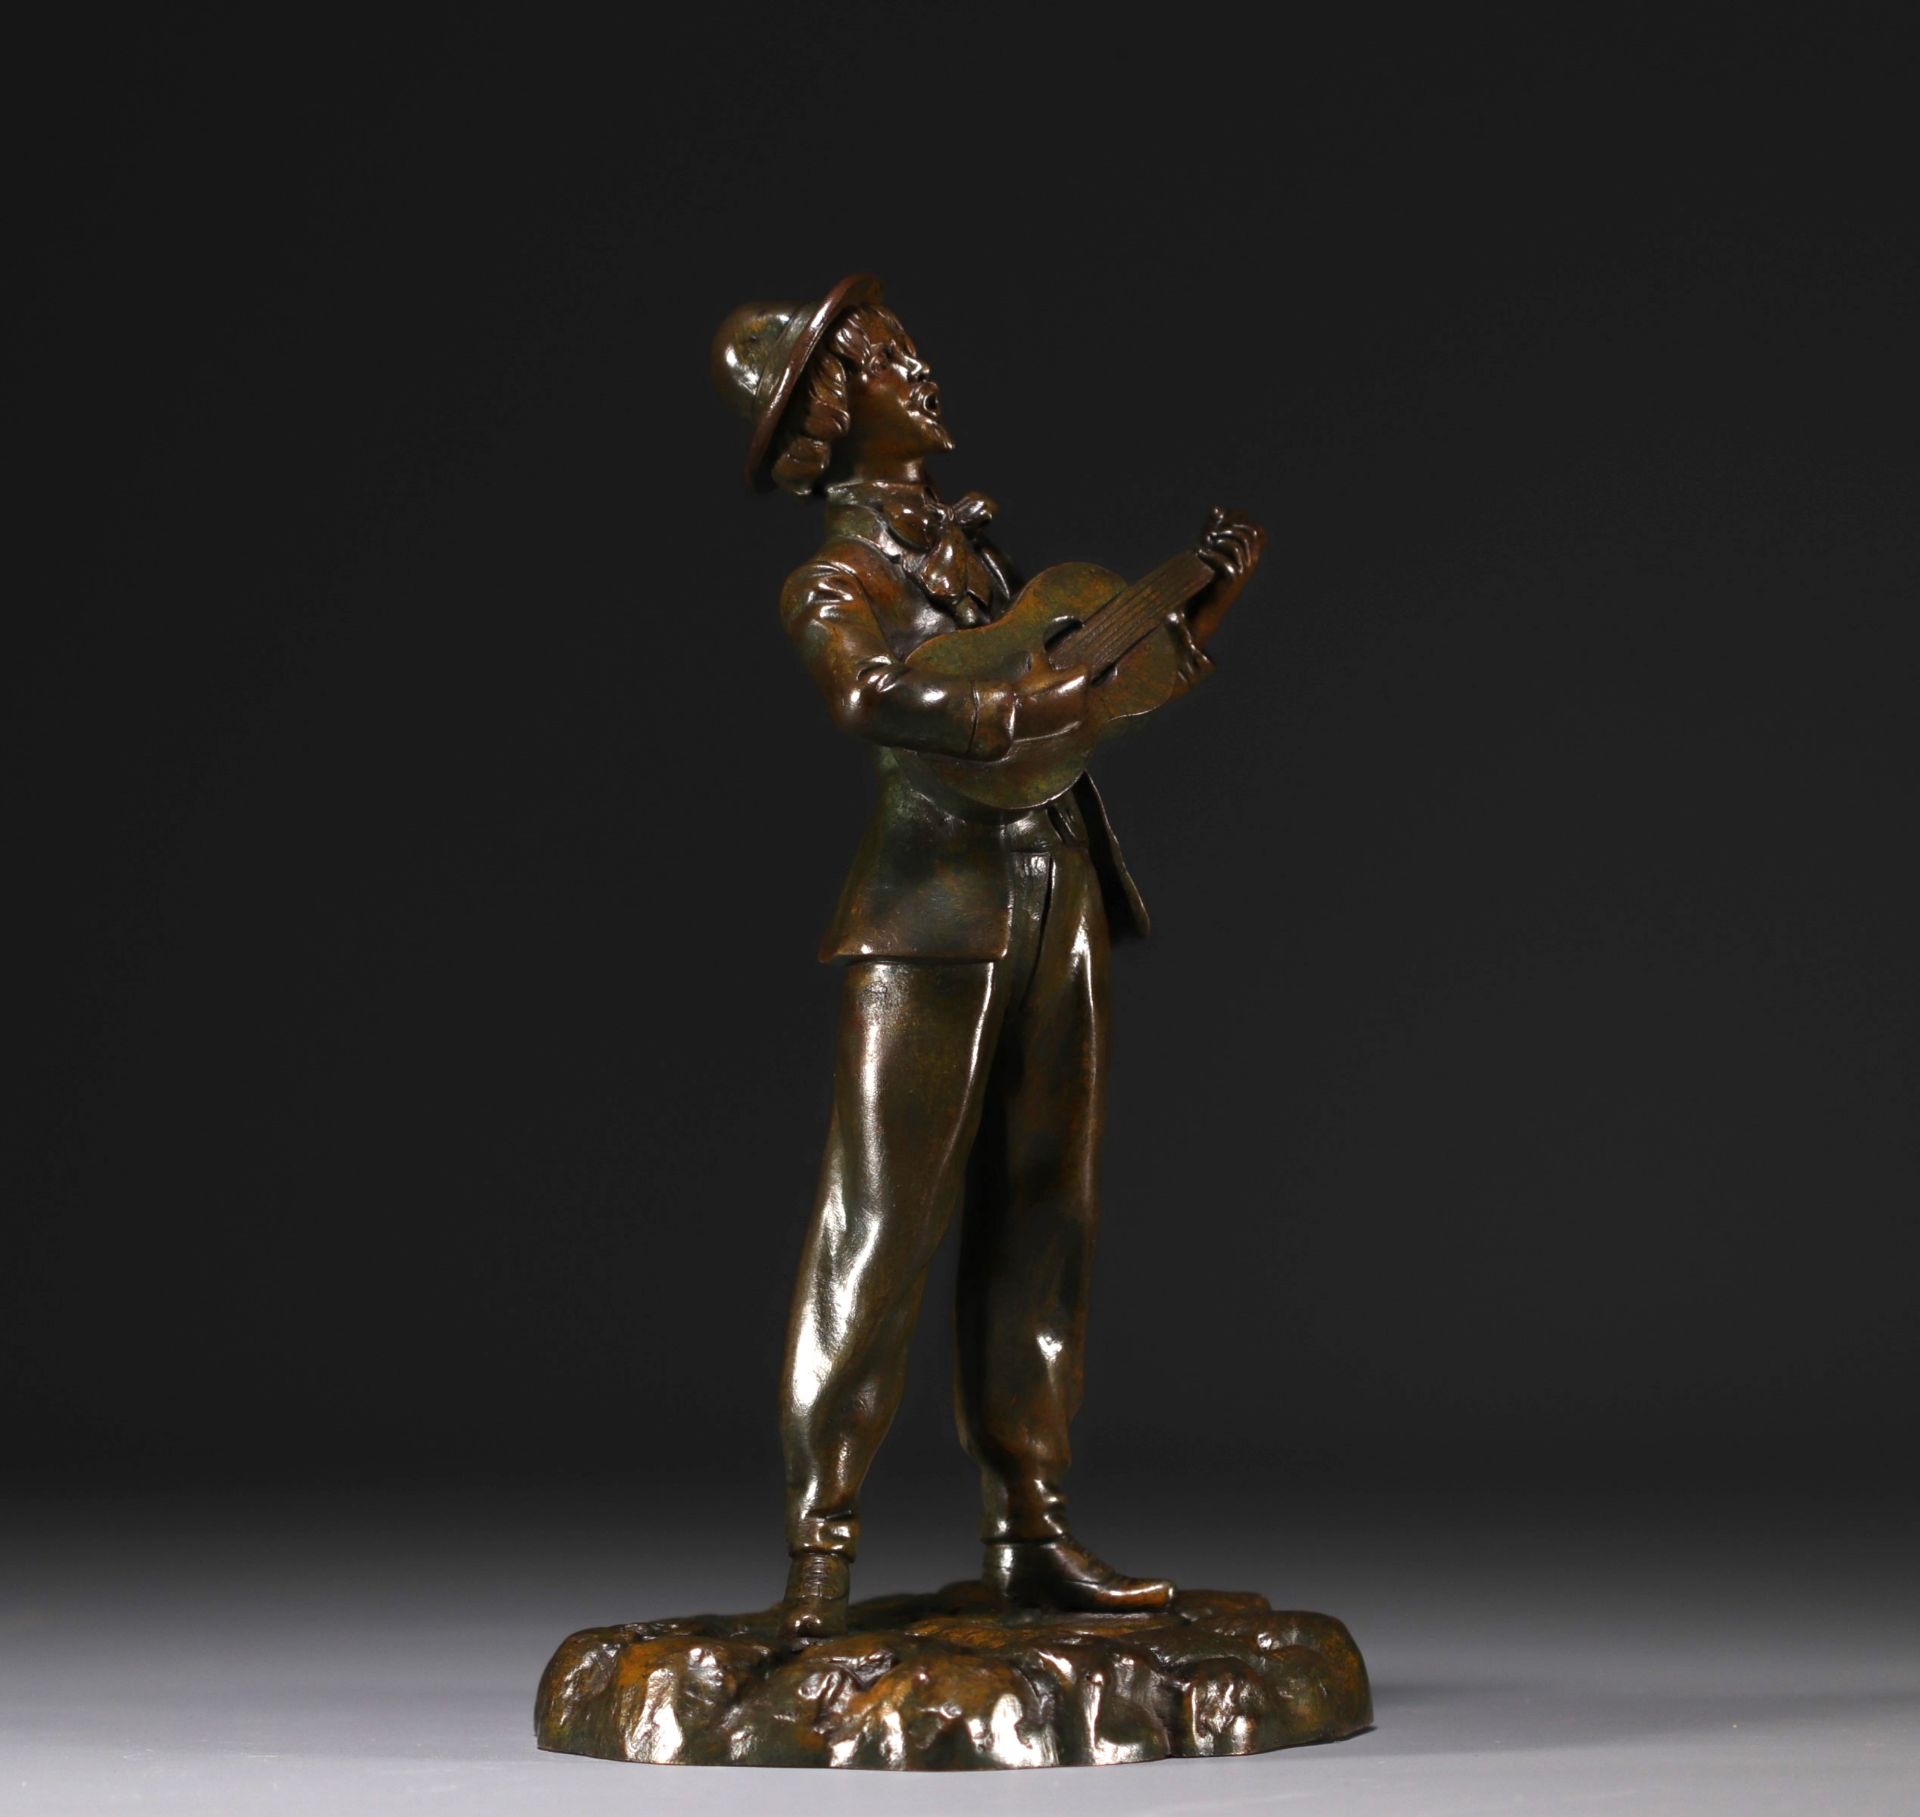 Eugene WATRIN - "Young boy with a guitar" Bronze sculpture. - Image 2 of 6